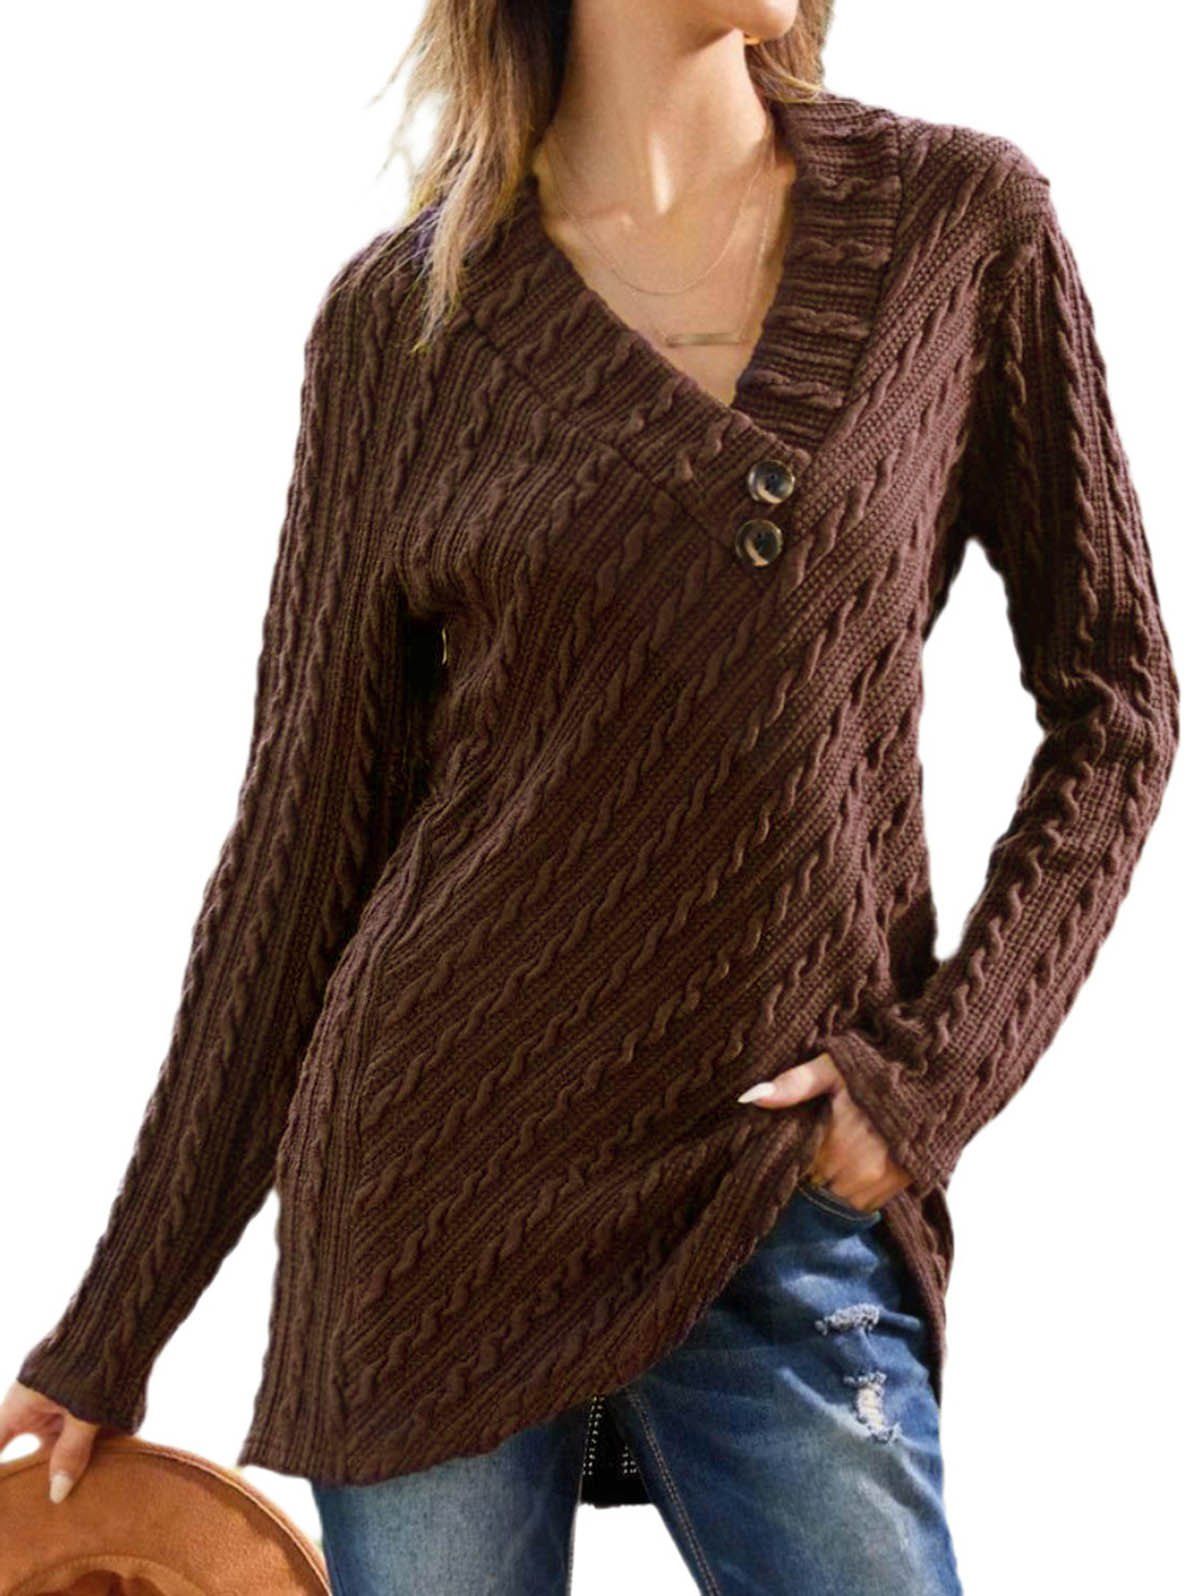 Solid Color Textured Long Knitwear Mock Button Full Sleeve V Neck Knitwear - COFFEE 2XL